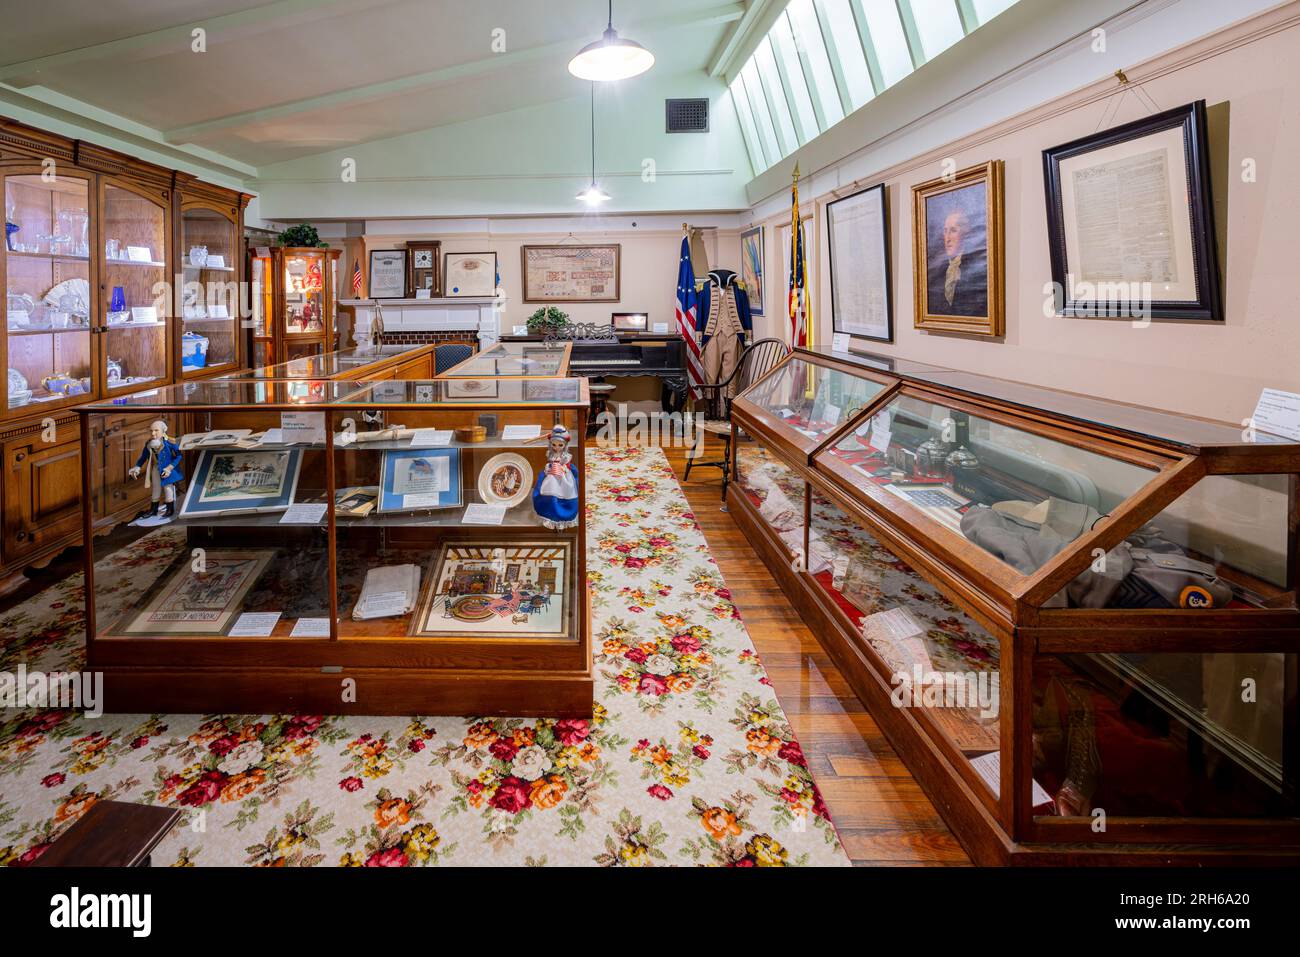 Oklahoma, AUG 3 2023 - Interior view of the Marland's Grand Home Stock Photo